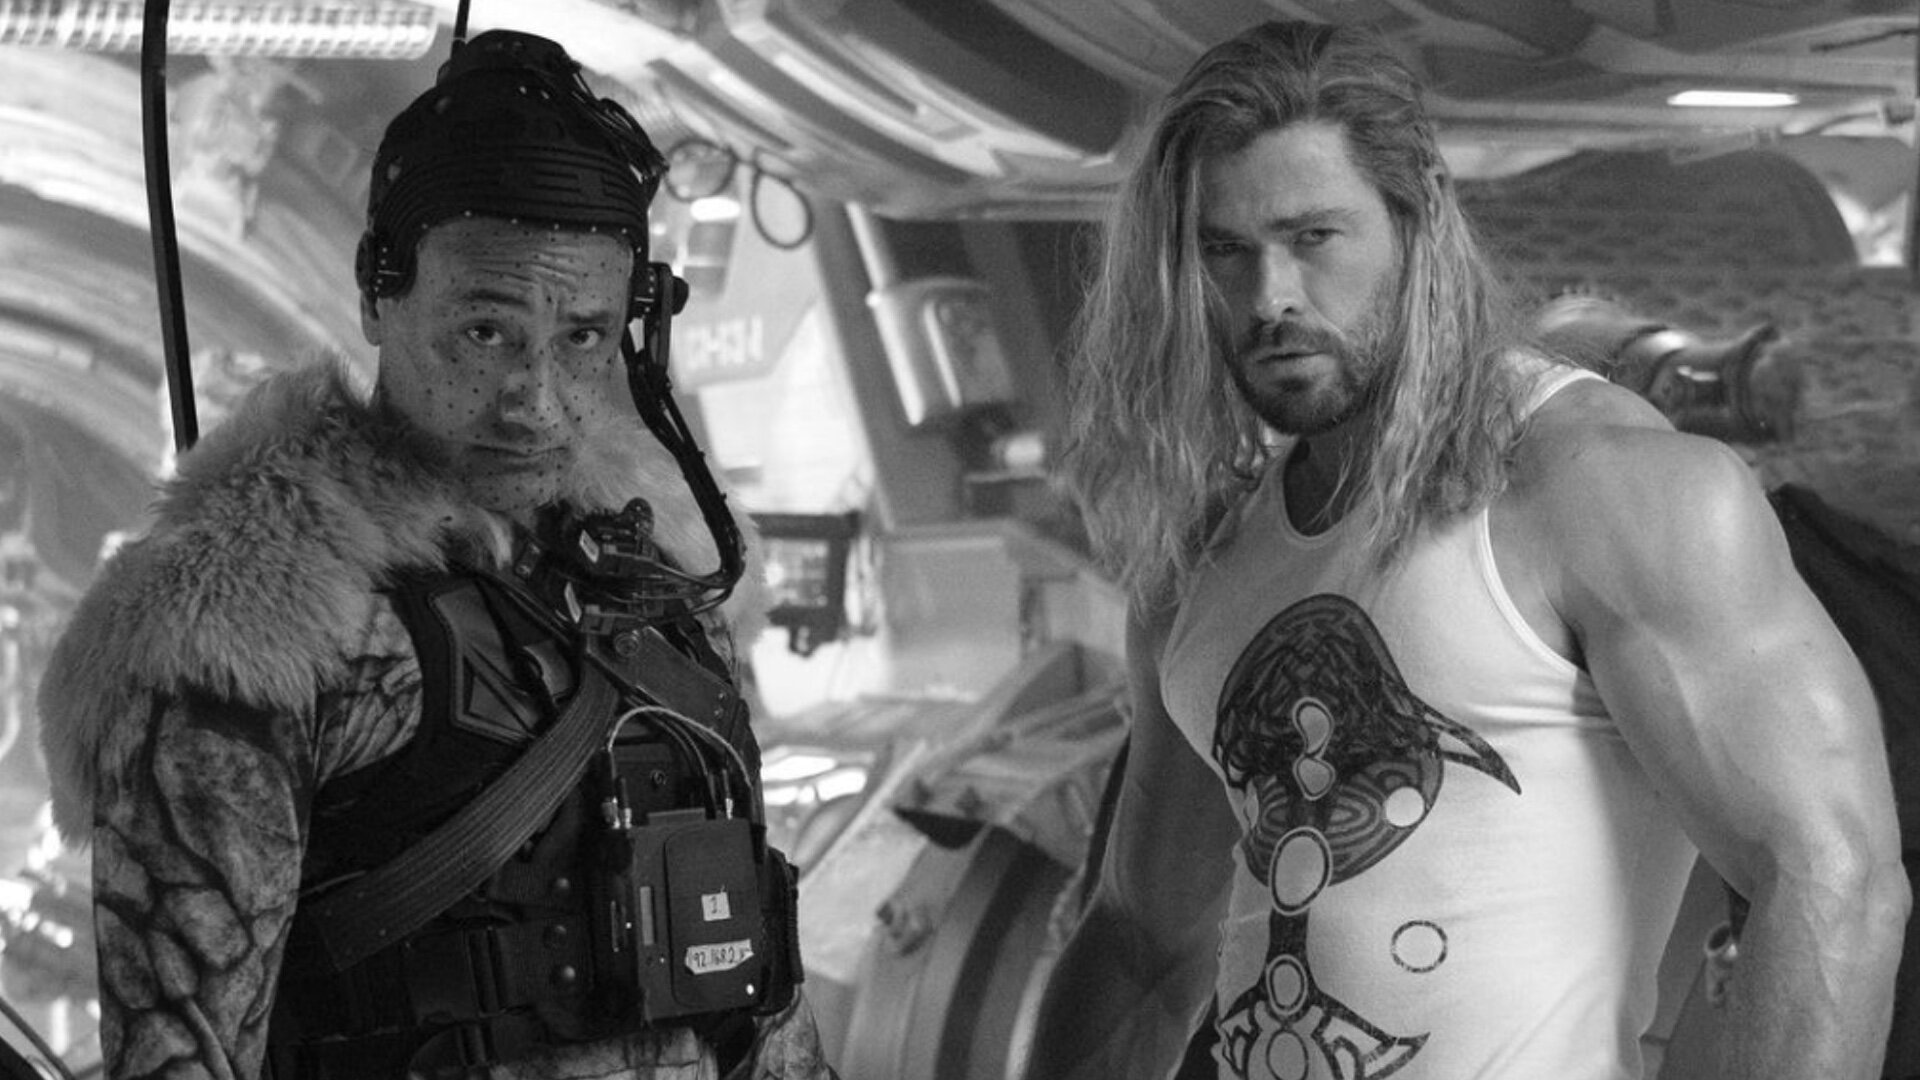 Marvel's THOR: LOVE & THUNDER Wraps Production and Here's a Fun Set Photo